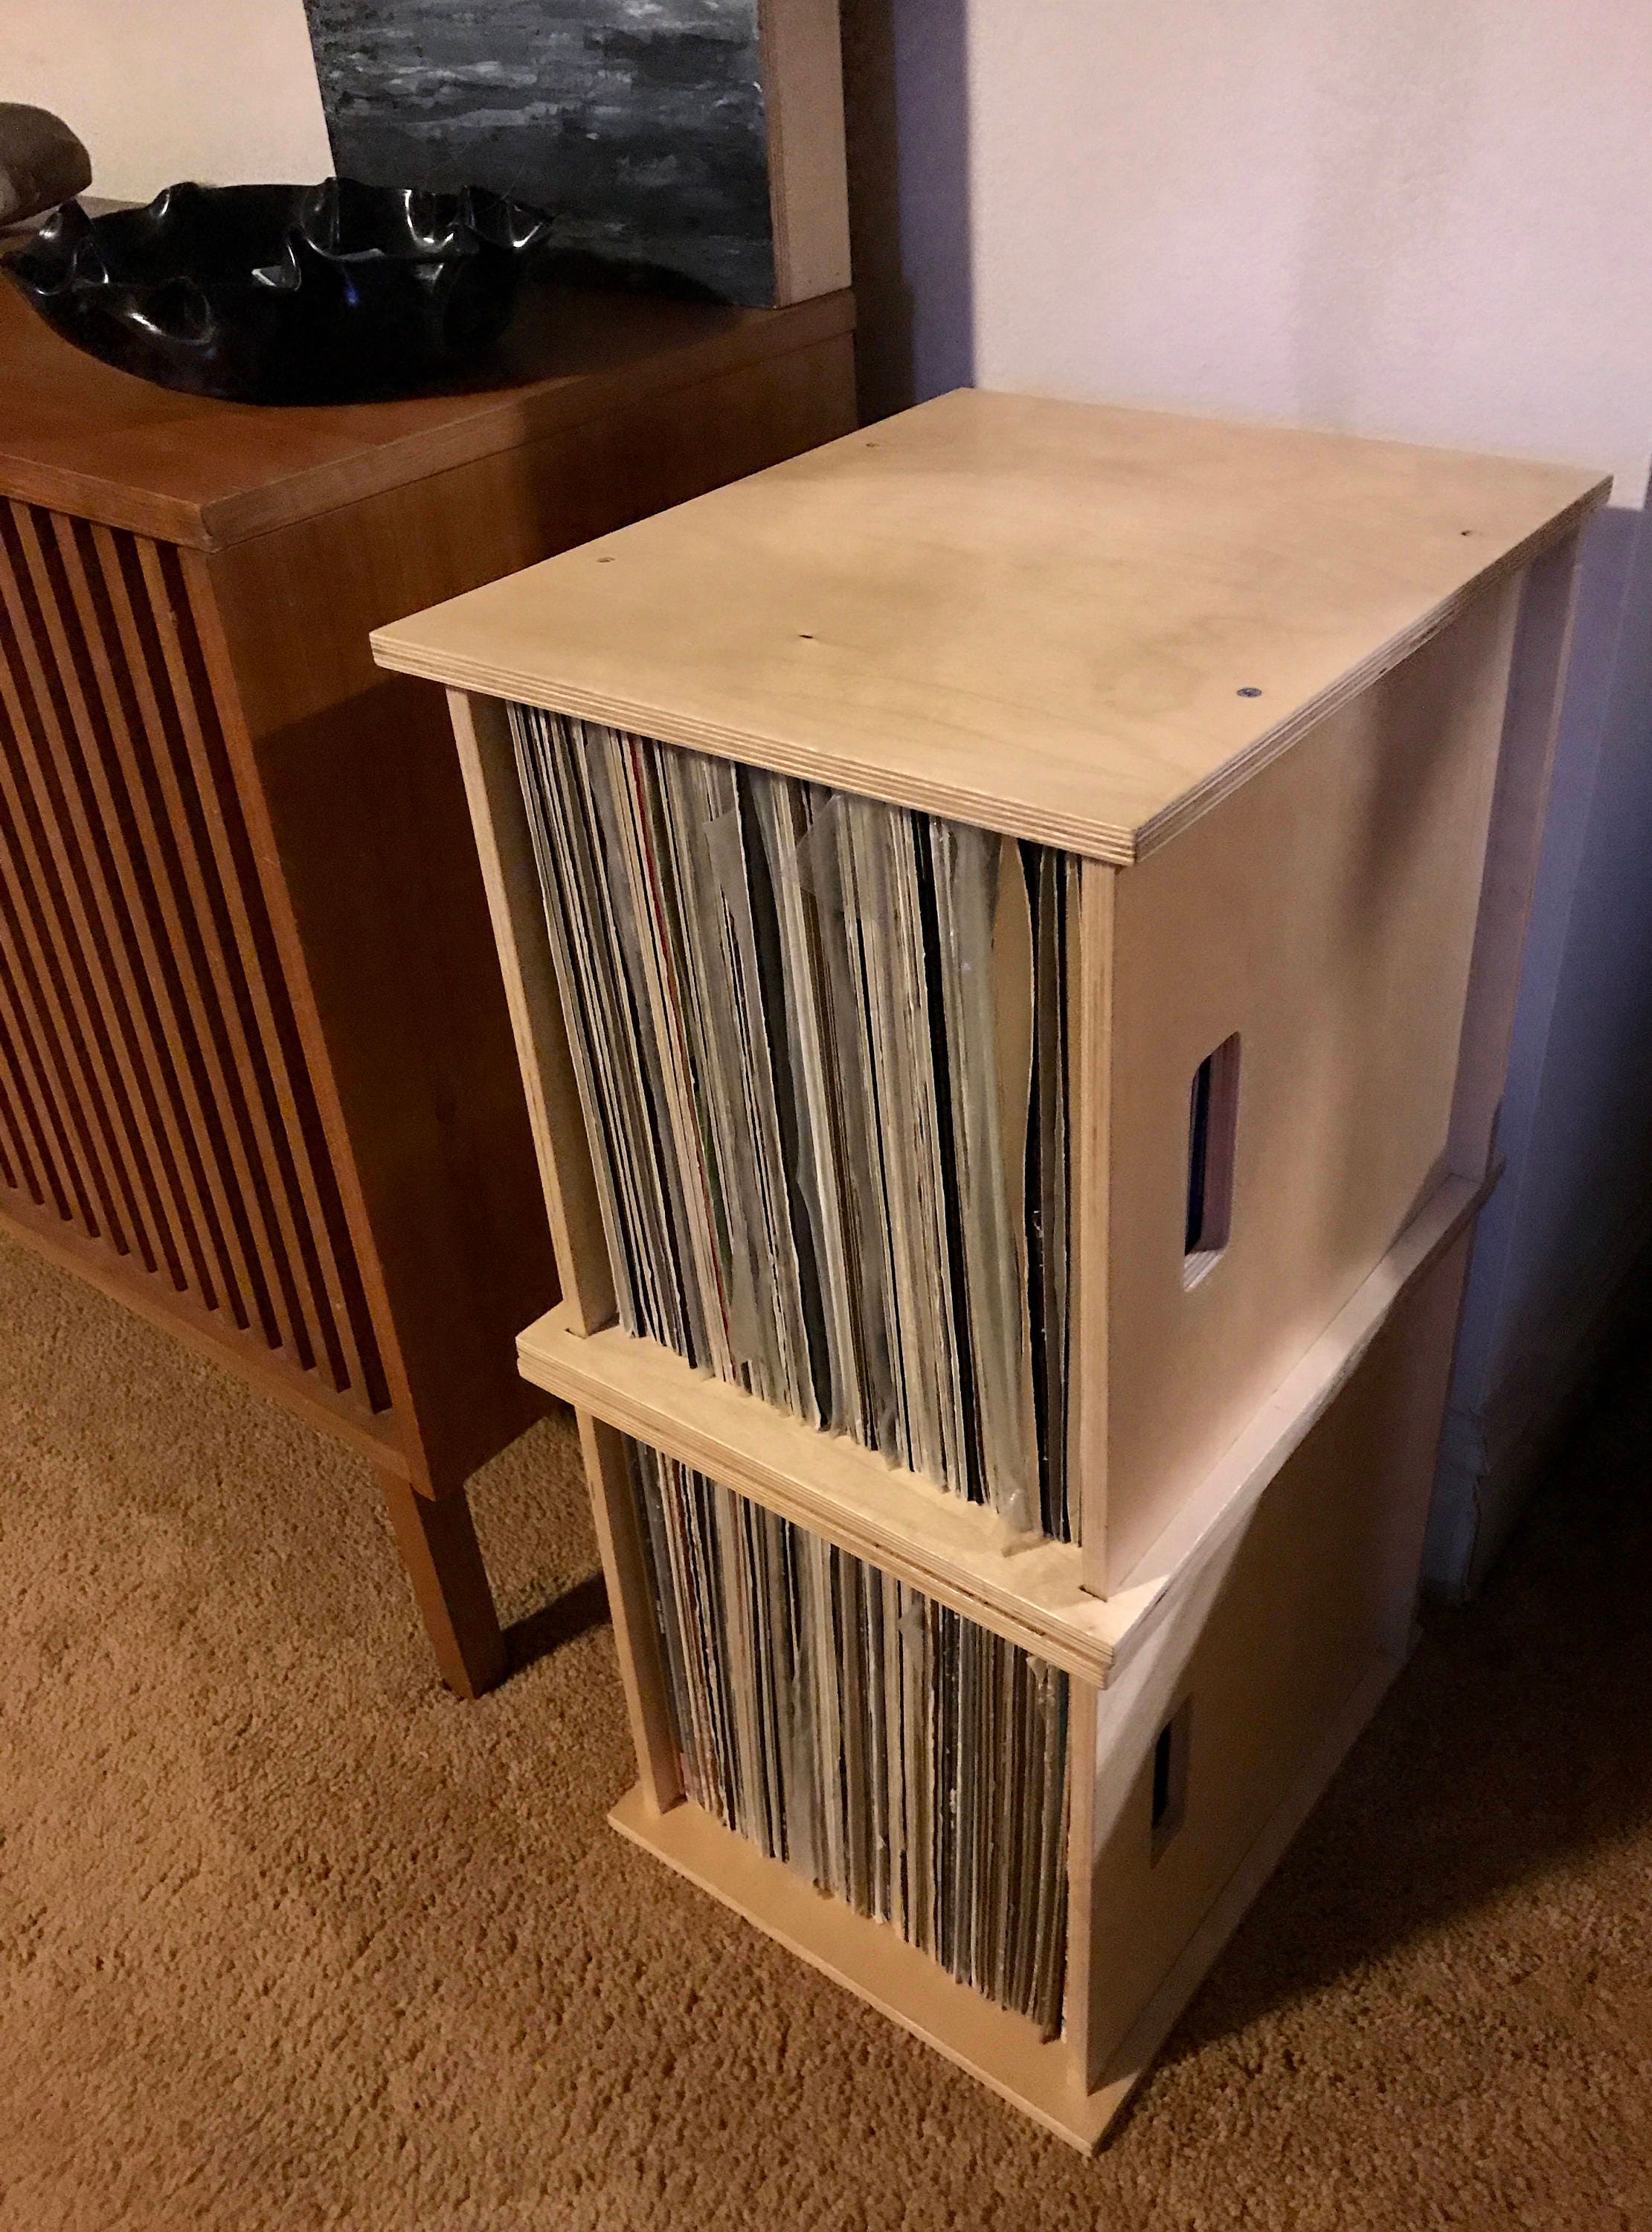 Vinyl Record Storage Cube - Stackable, Modern, Hand Made in USA